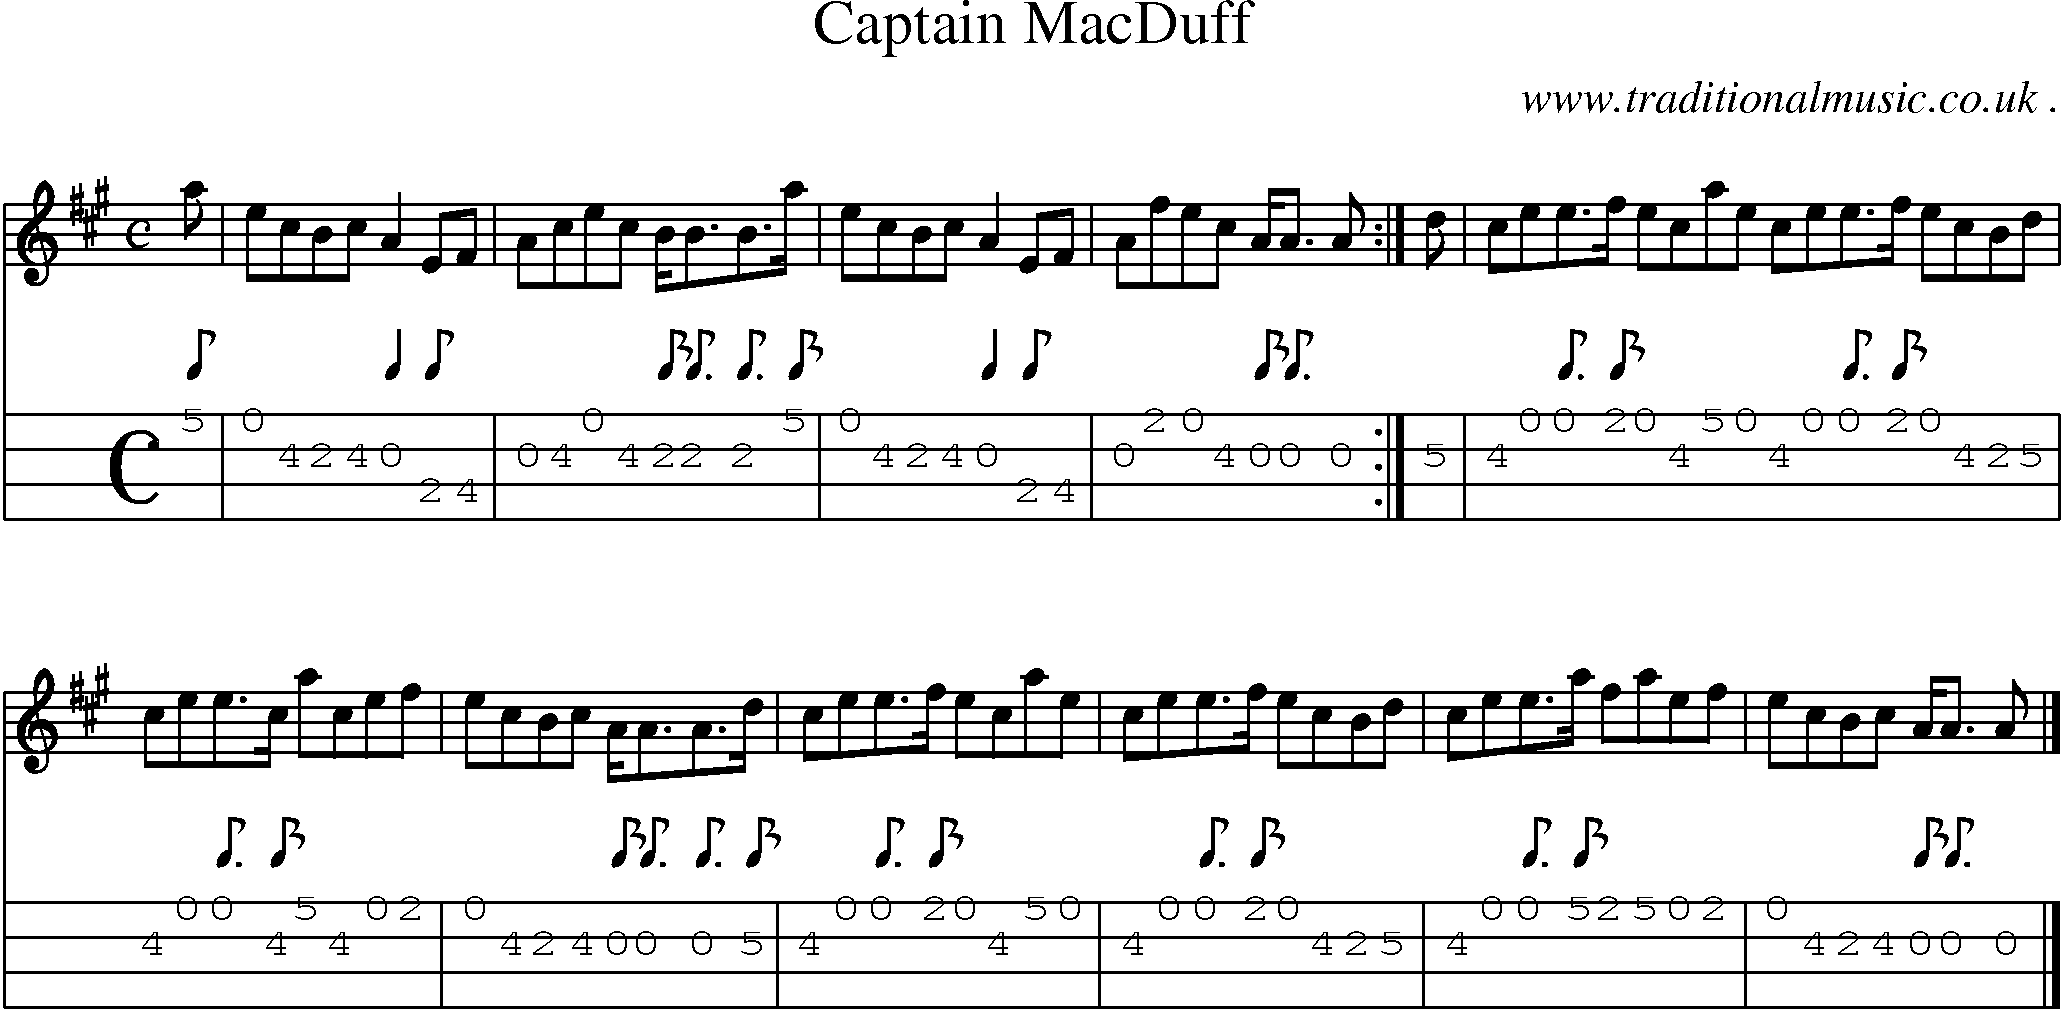 Sheet-music  score, Chords and Mandolin Tabs for Captain Macduff